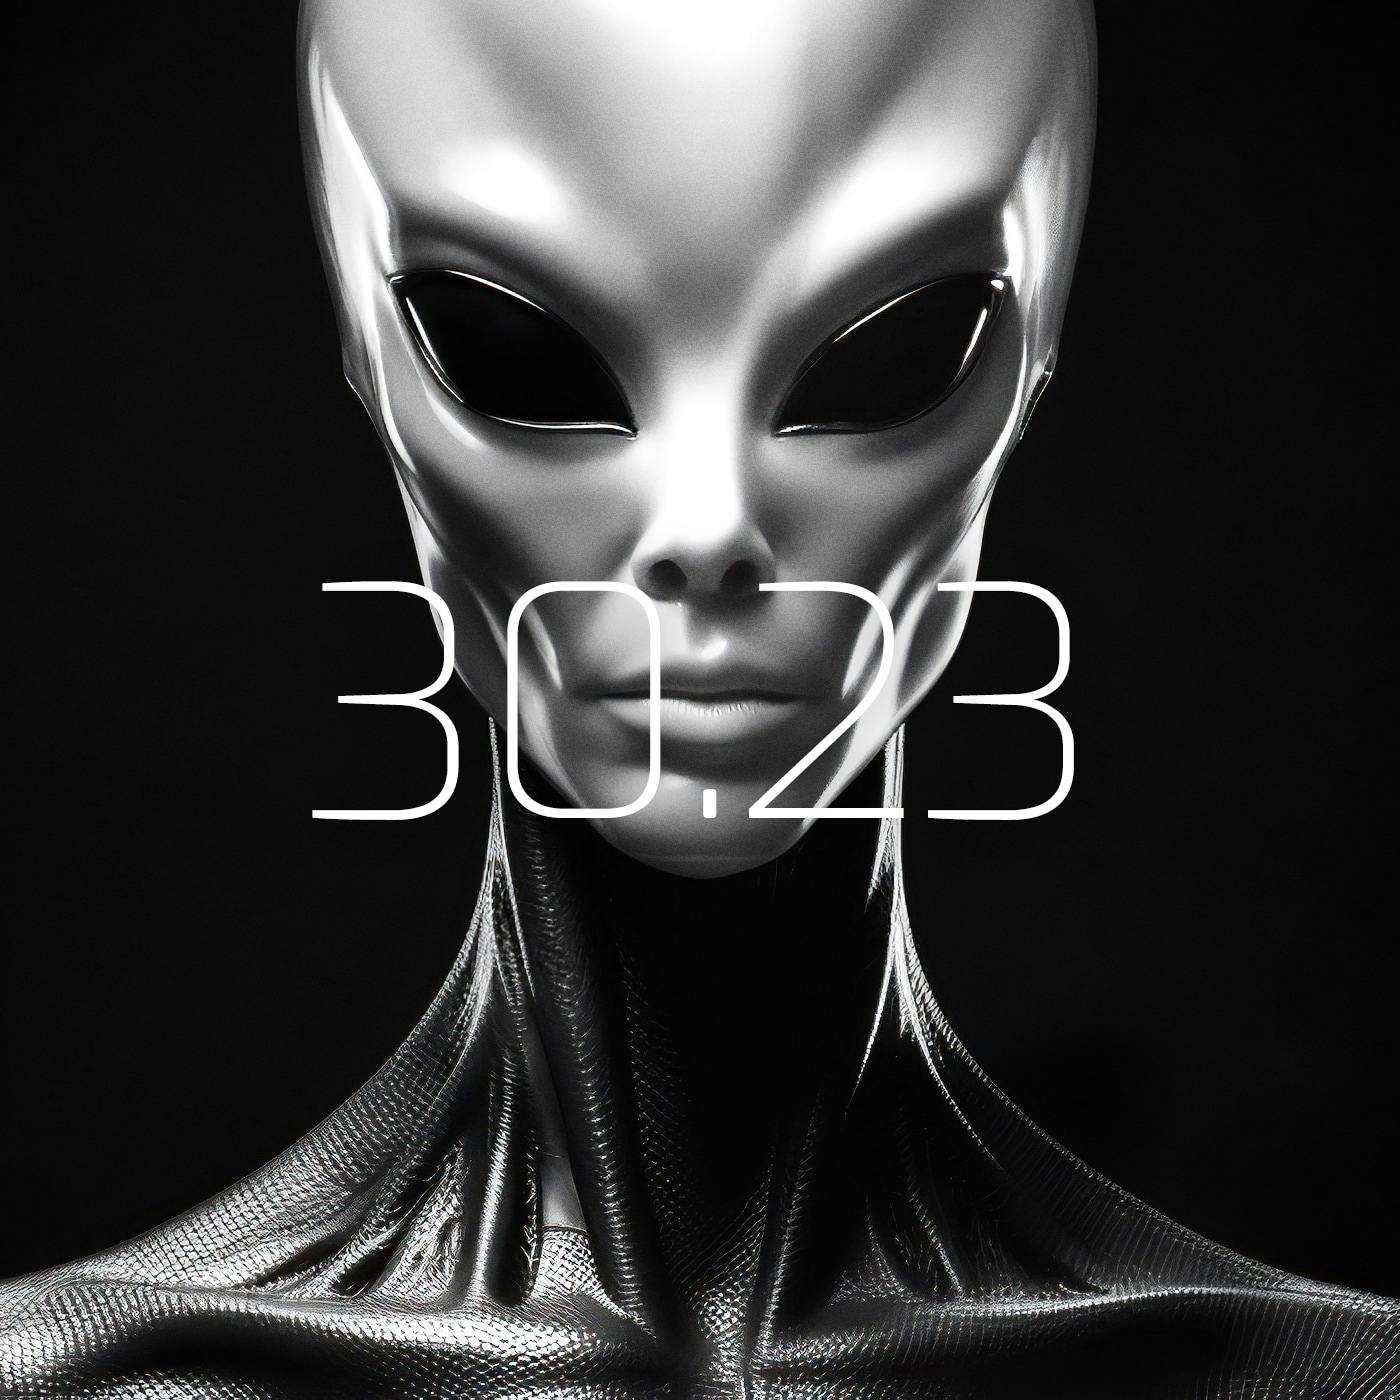 30.23 - MU Podcast - The Abductee Enforcers